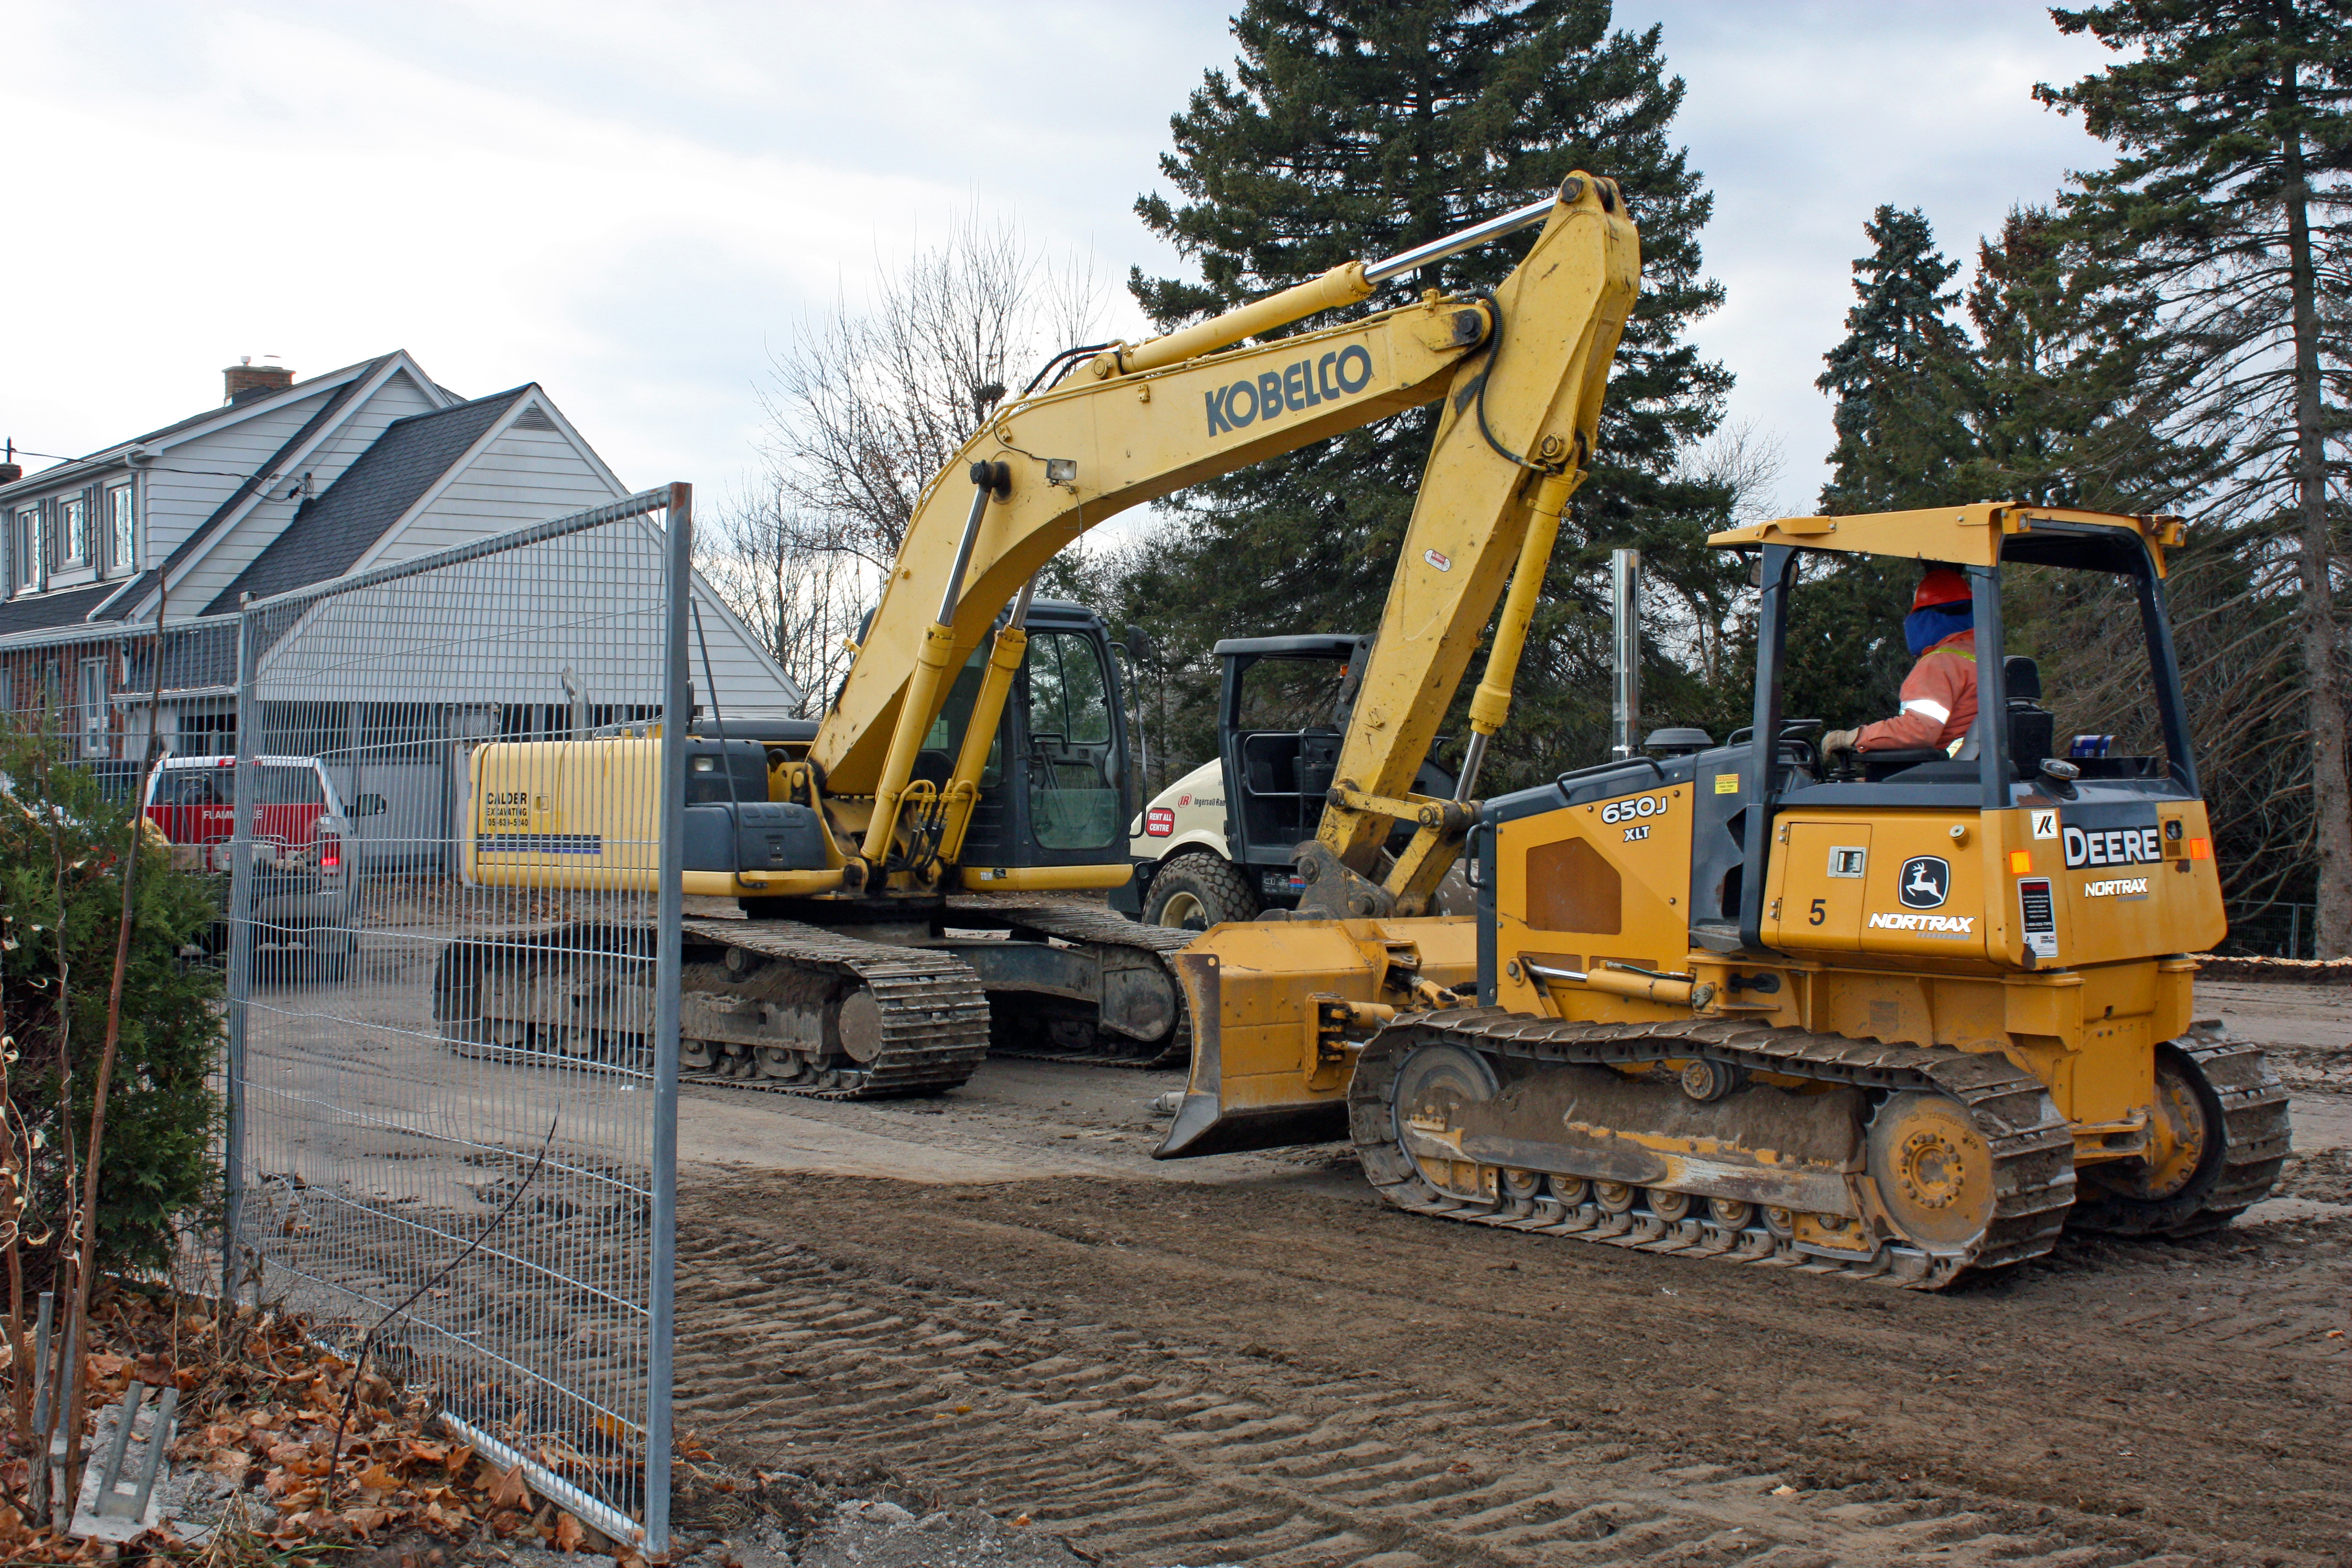 Construction work within the residential area, across from Lock 19